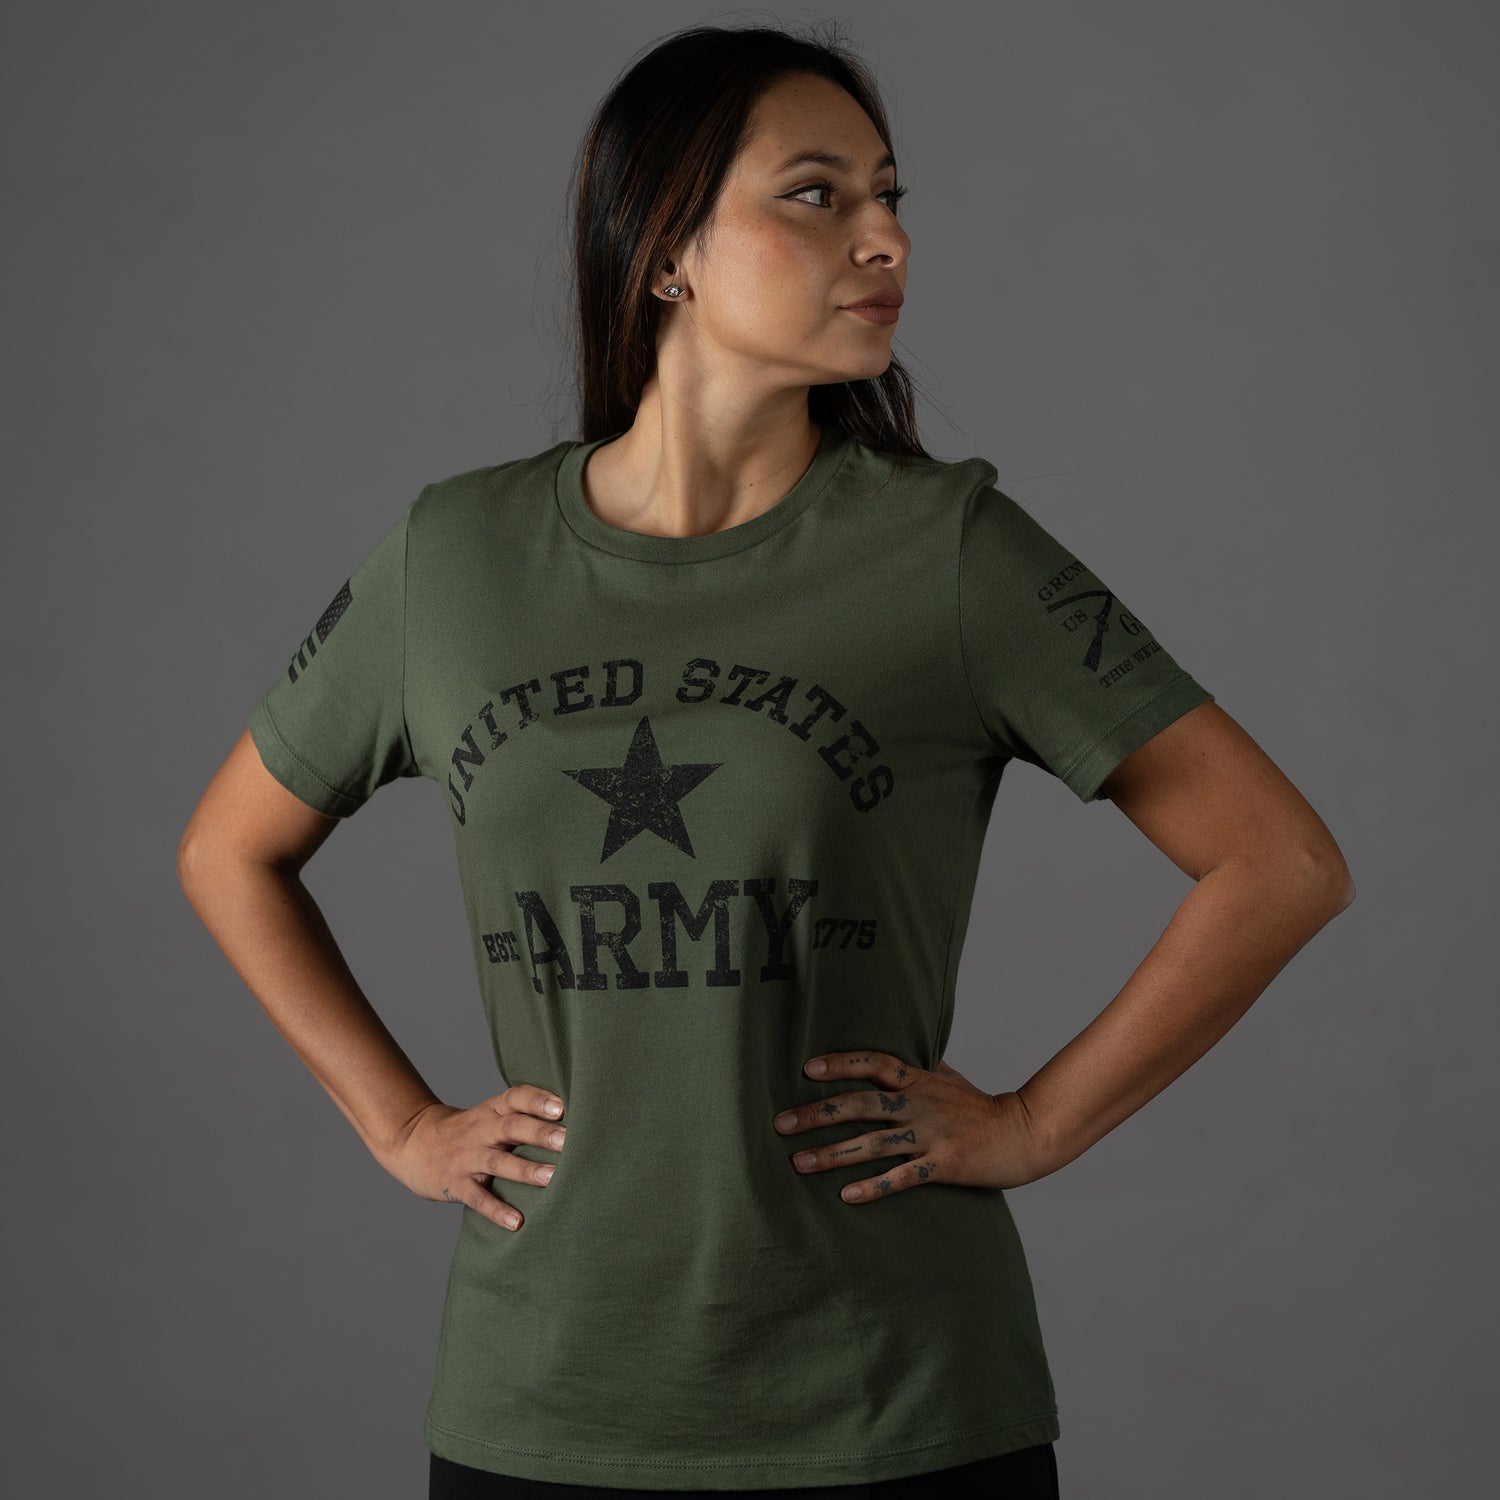 United States Army Shirts for Women